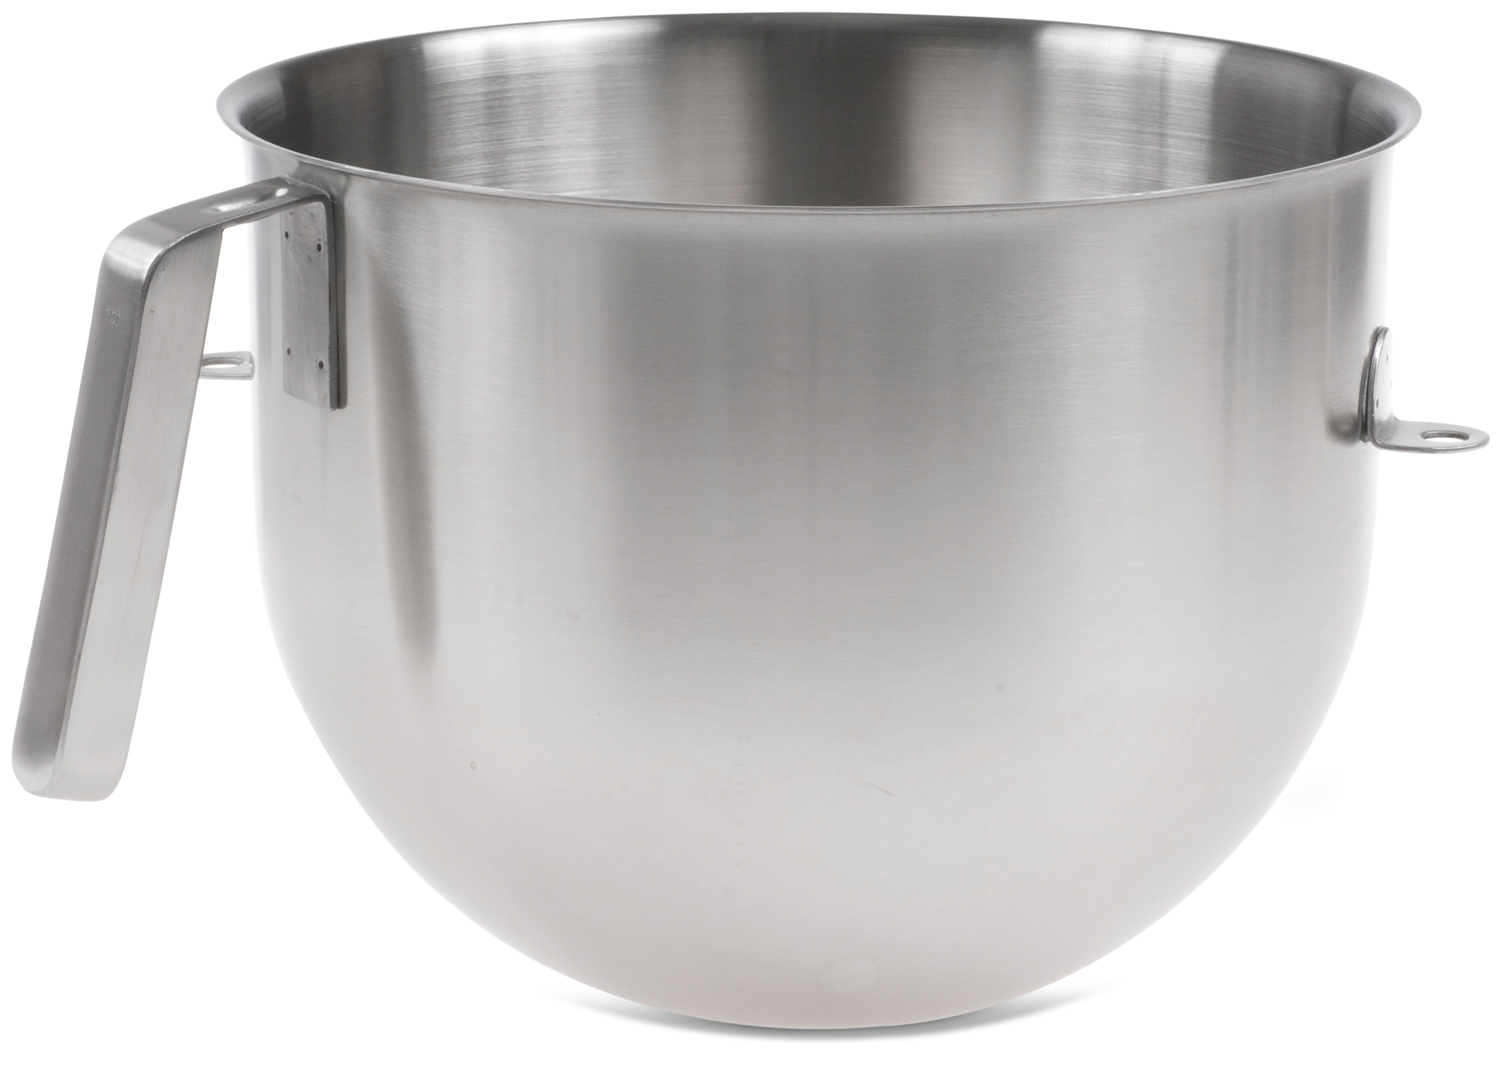 Stainless Steel Bowl for Kitchen Aid 7 Quart Commercial Mixer.